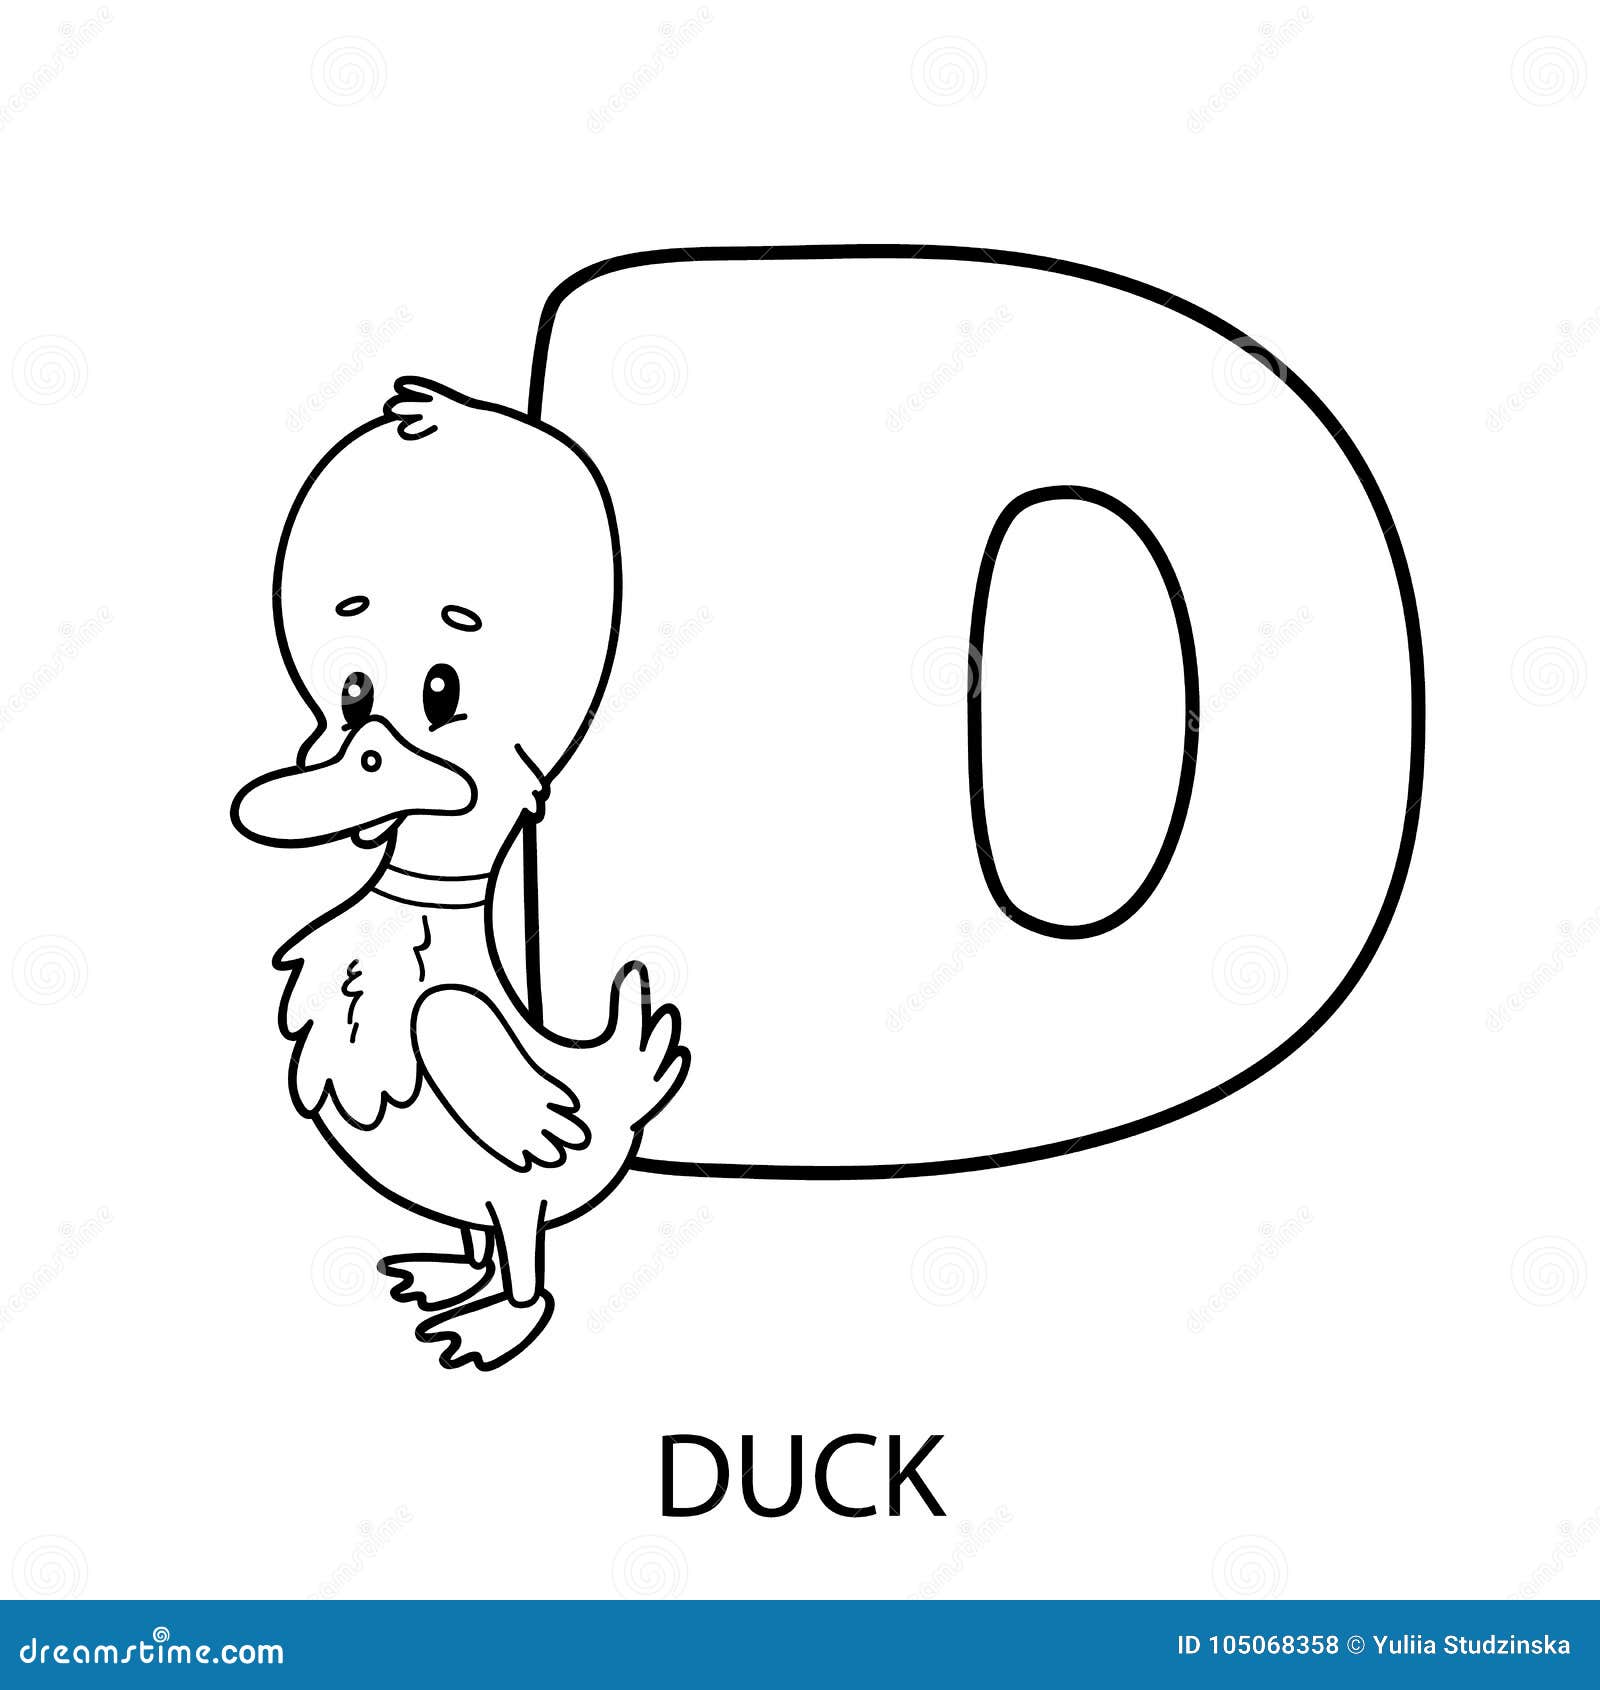 Duck Alphabet Coloring Page Stock Vector - Illustration of mascot ...